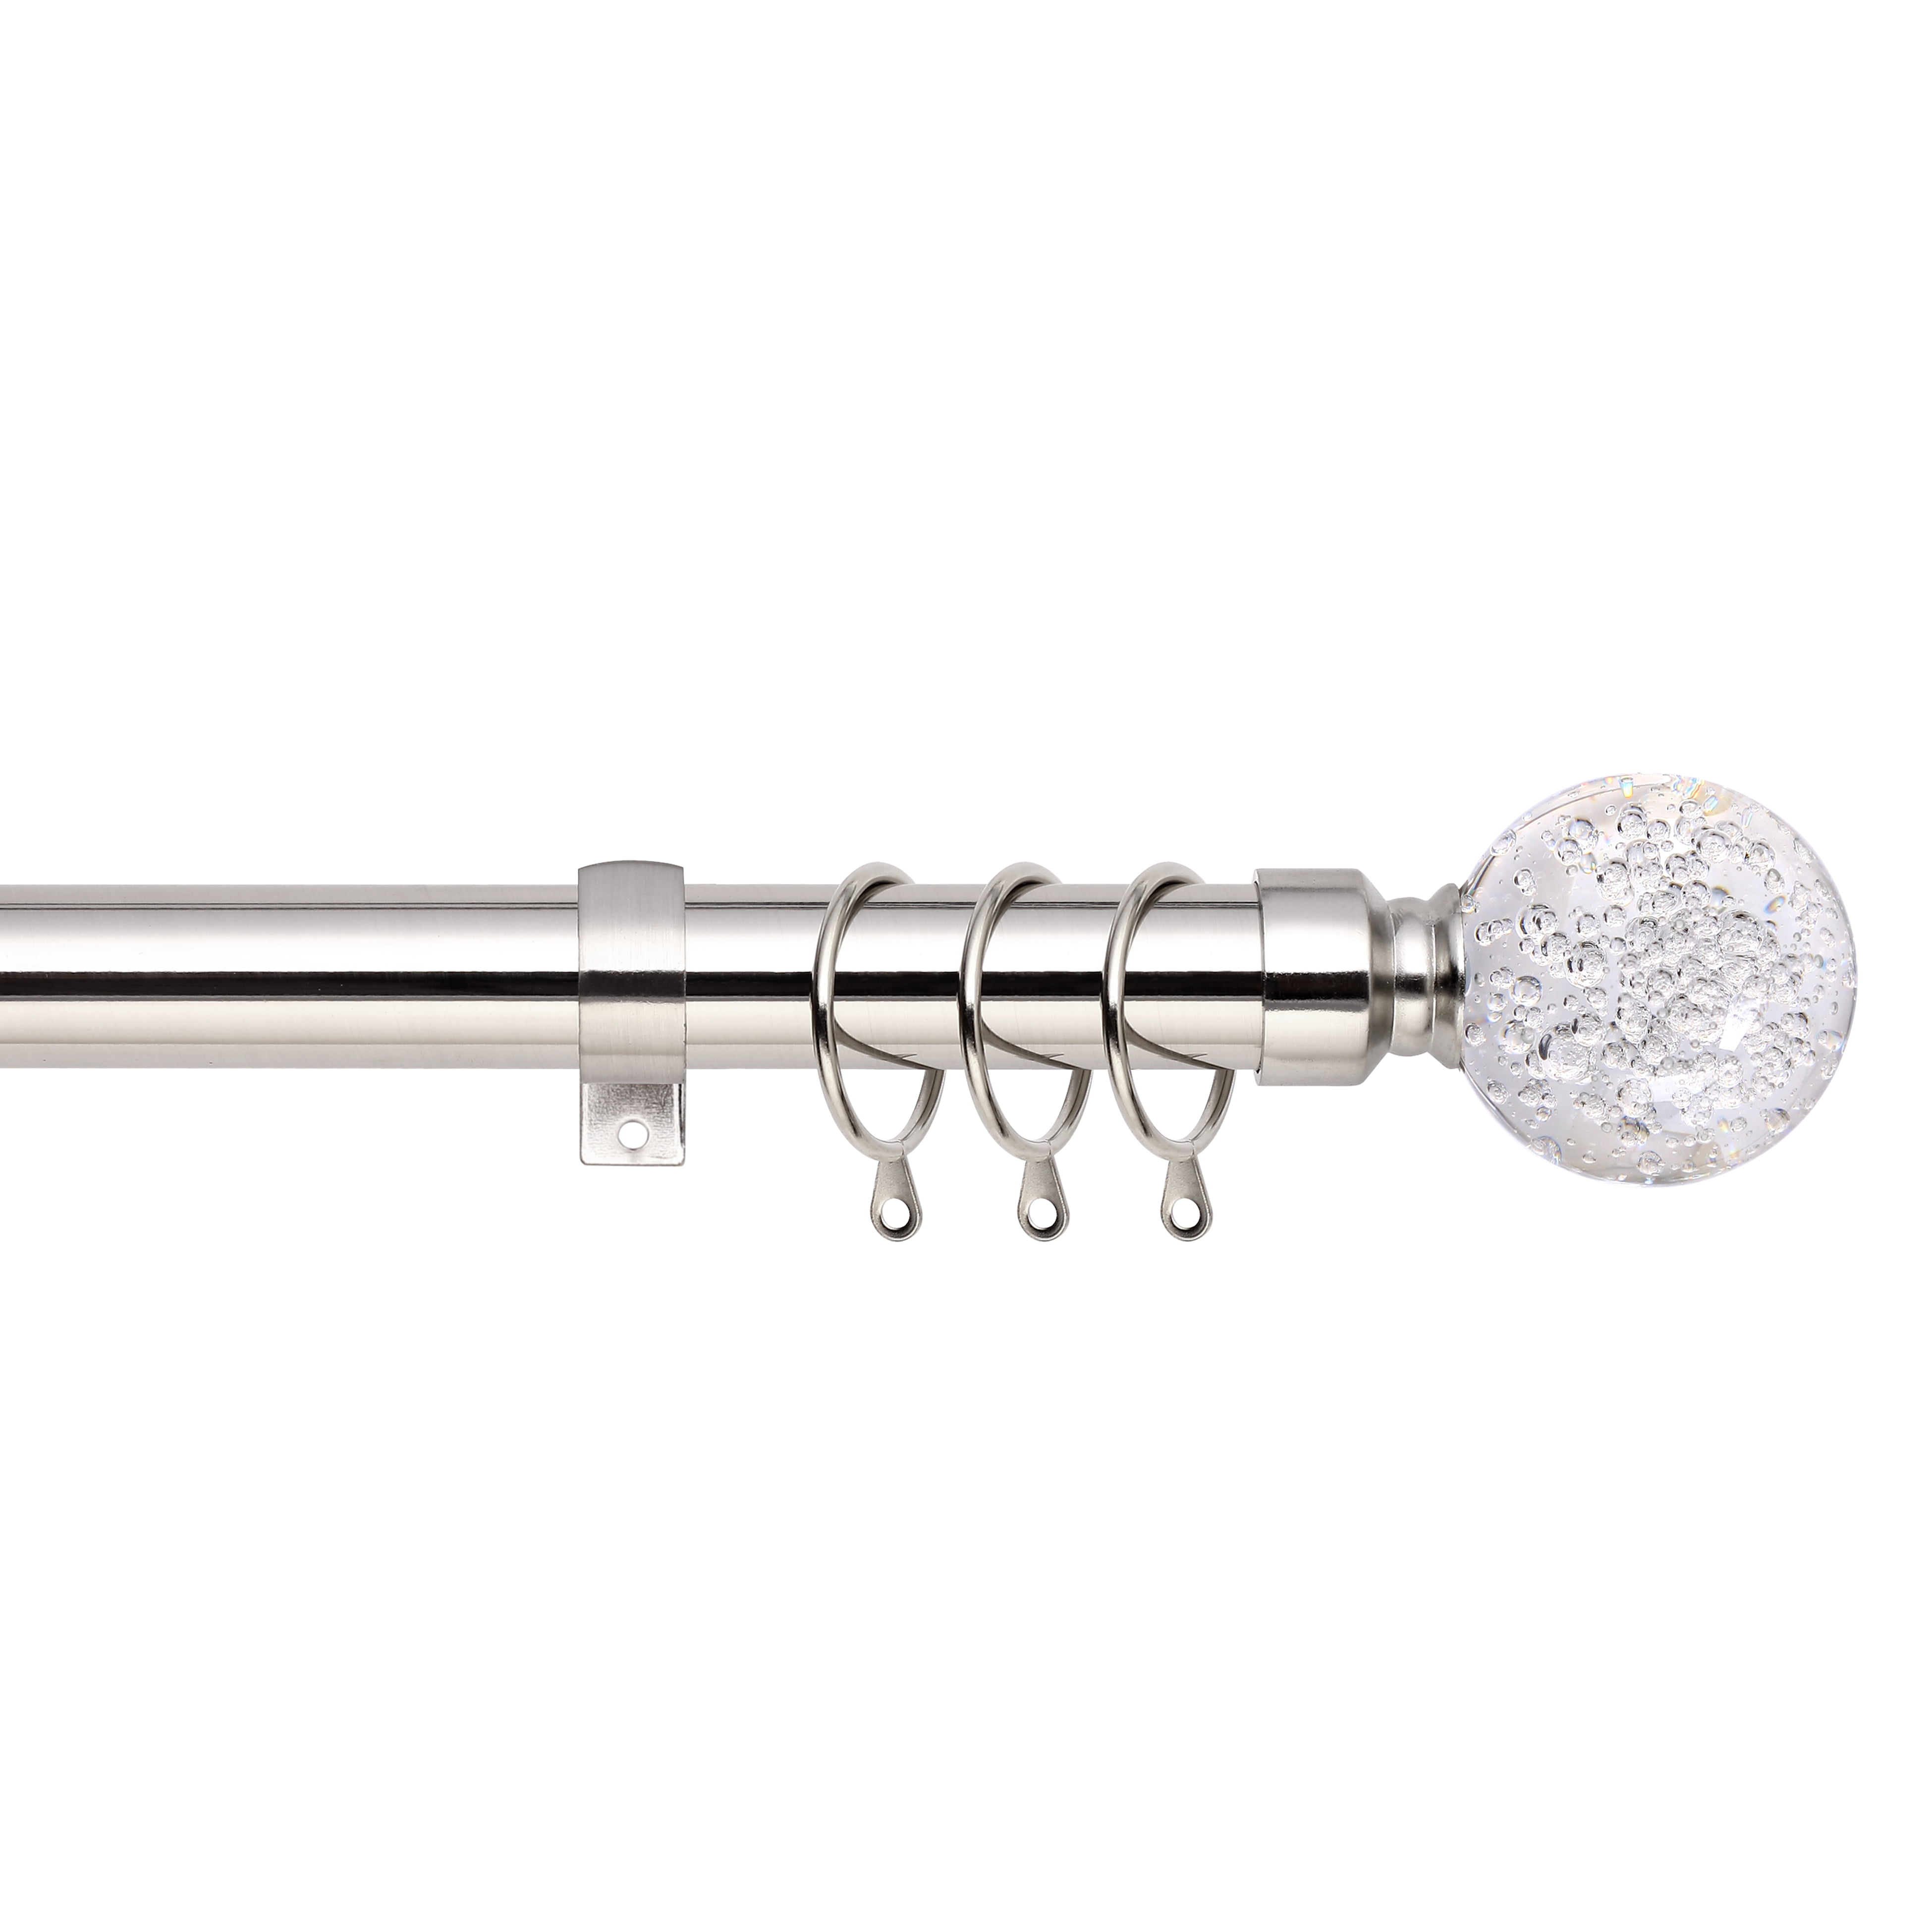 In a Variety of Colours and Sizes 25//28mm A.Unique Home Plain Round Ball Metal Extendable Curtain Pole with Rings and Fittings Nickel, 70cm - 120cm, 28 to 47 Approx